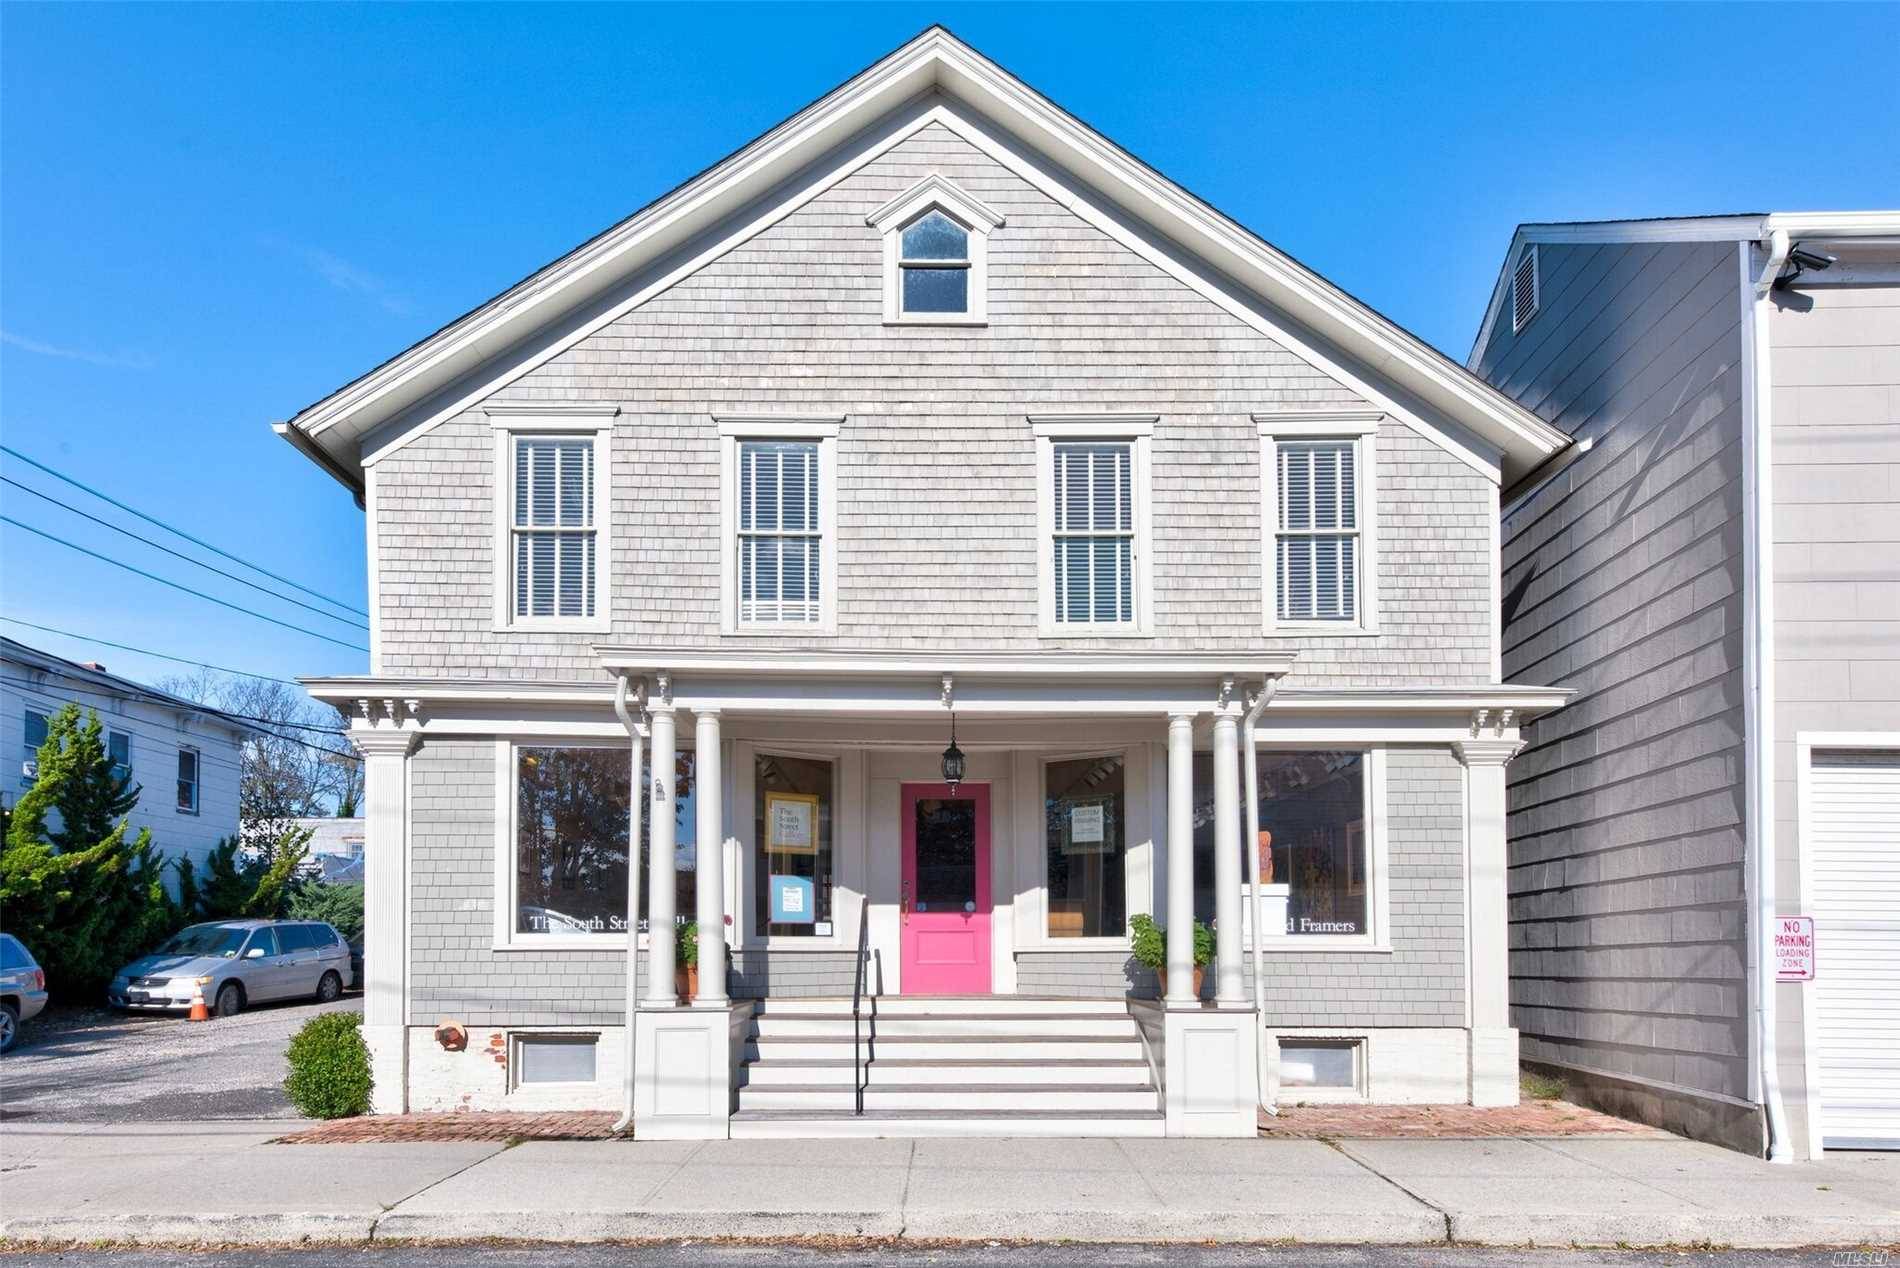 Commercial building in the heart of Greenport Village in mint condition offering multiple retail spaces 2nd floor apartment.